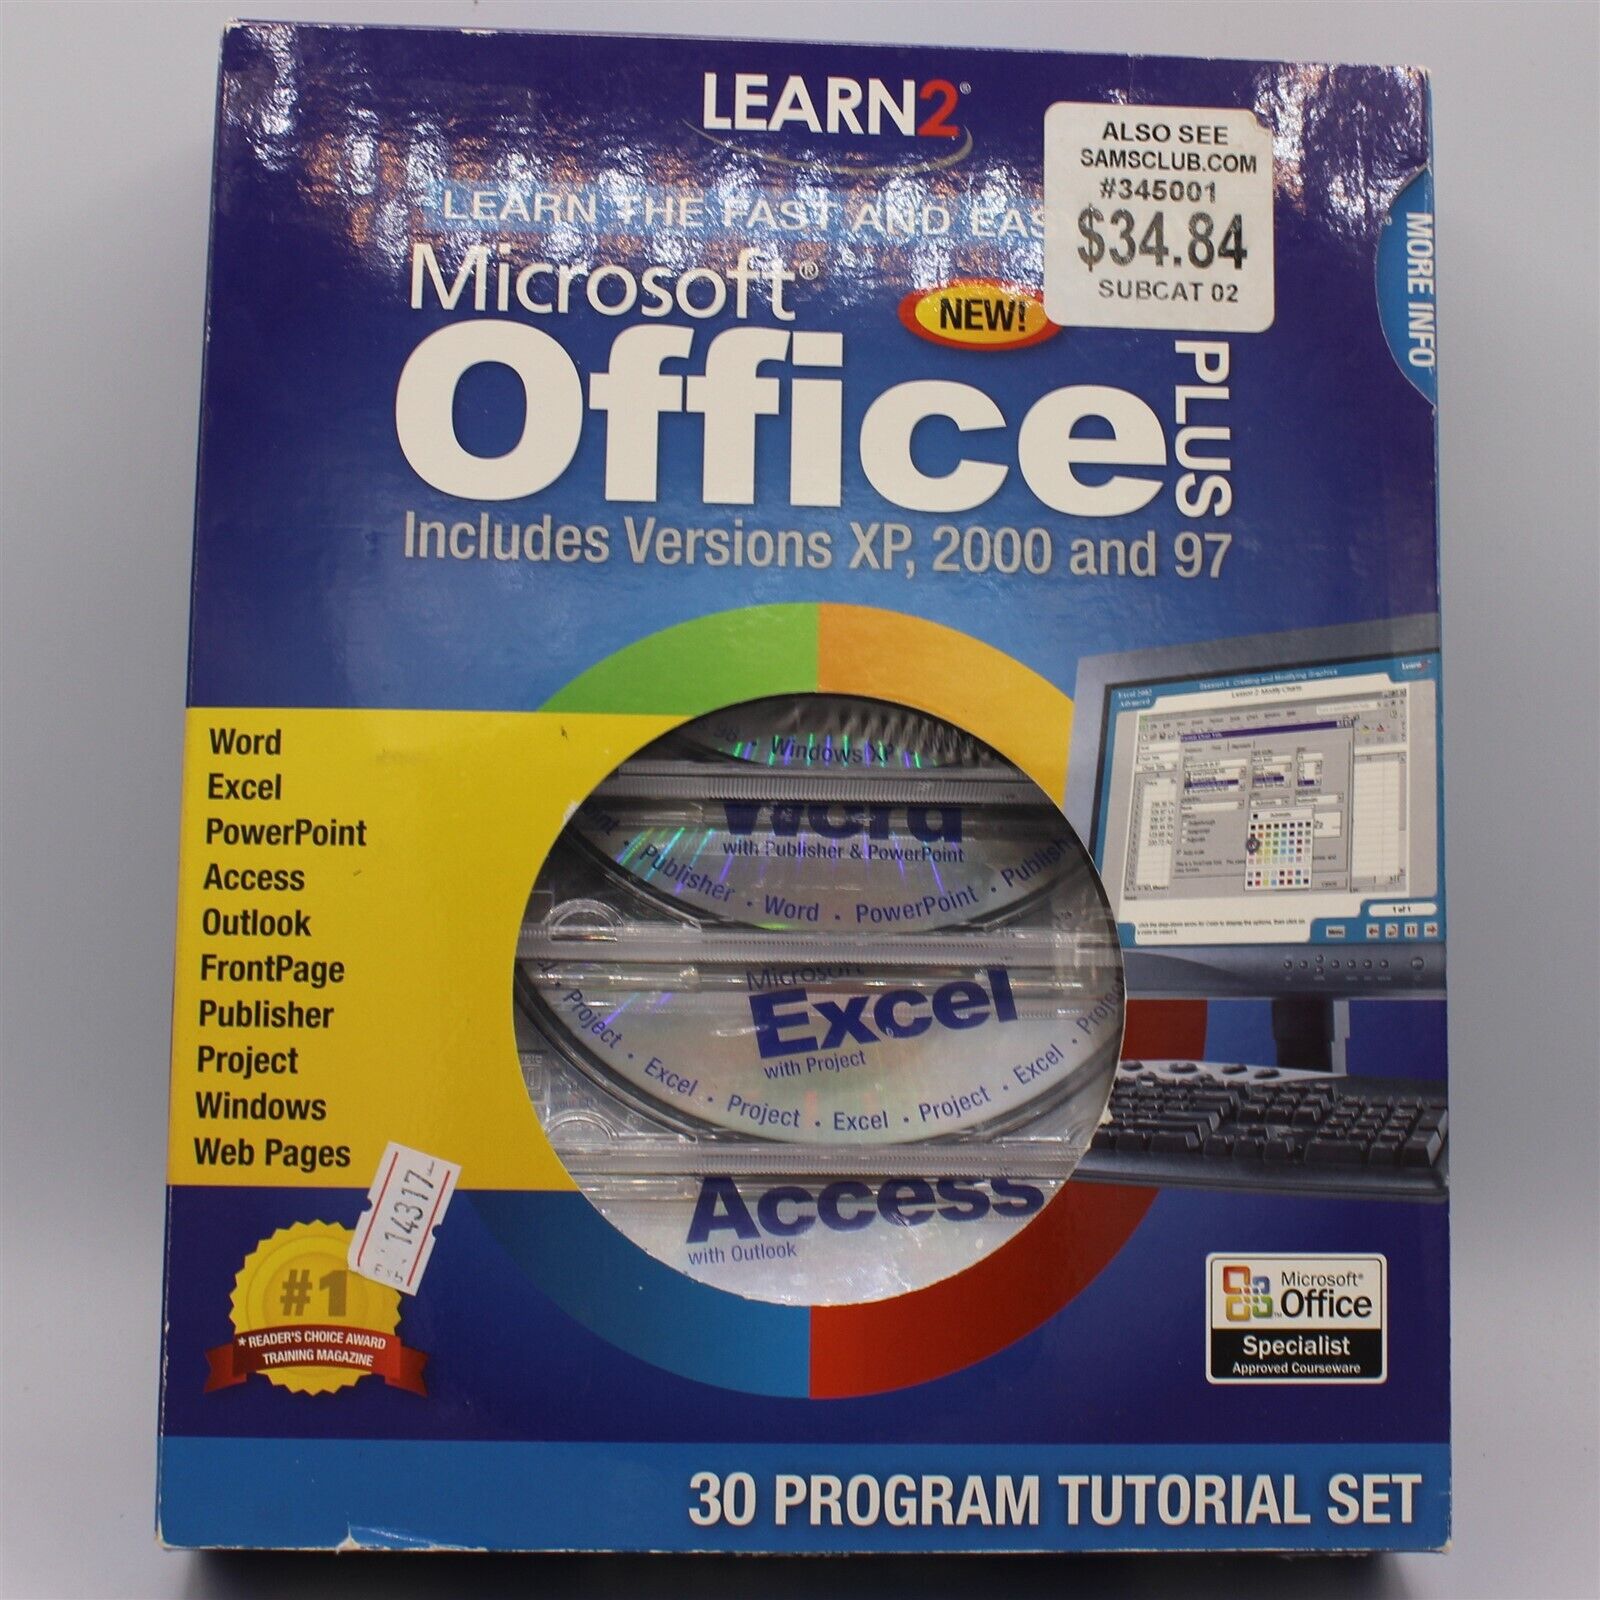 Learn 2 - Microsoft Office Plus - Includes Versions XP, 2000 and 97 - New Sealed